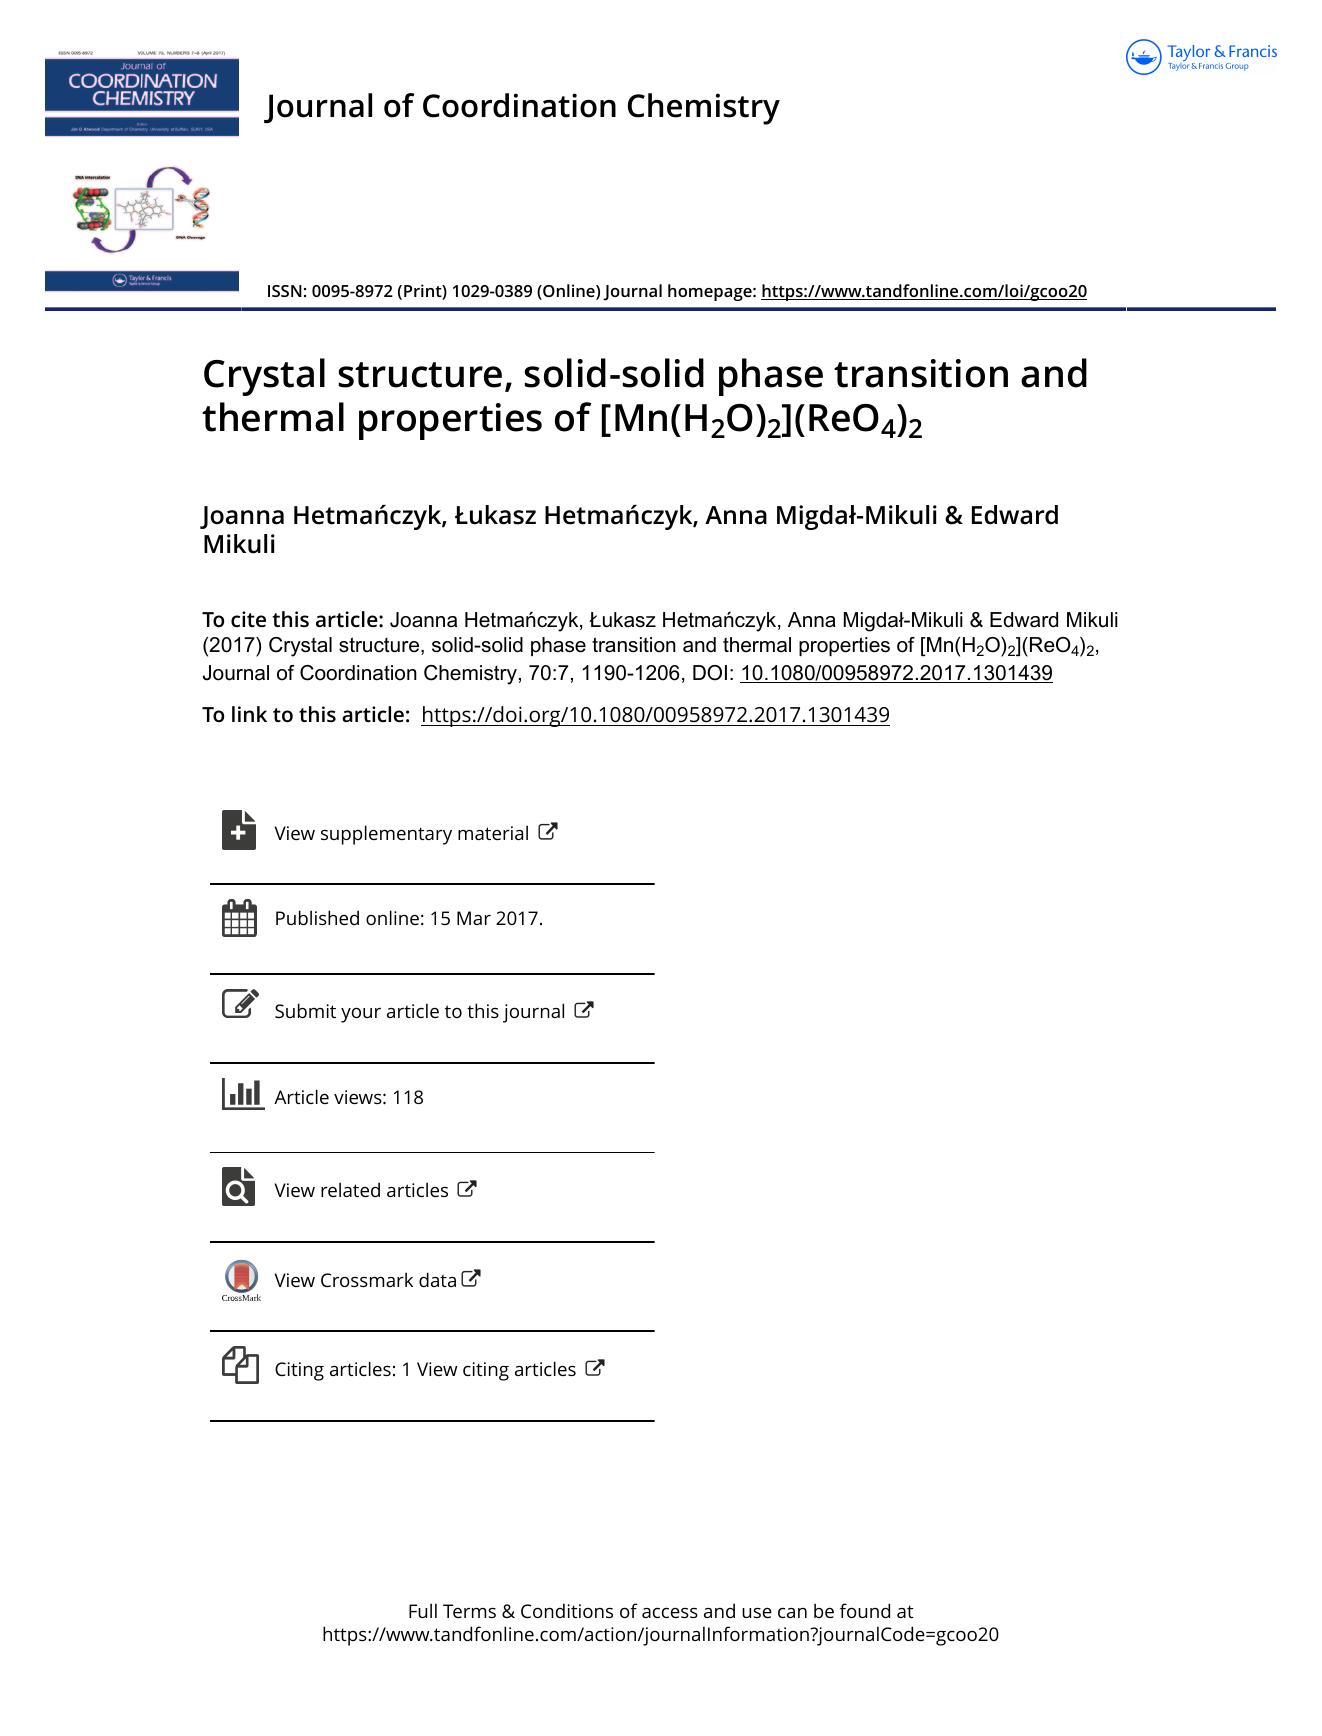 Crystal structure, solid-solid phase transition and thermal properties of [Mn(H2O)2](ReO4)2 by Joanna Hetmańczyk & Łukasz Hetmańczyk & Anna Migdał-Mikuli & Edward Mikuli